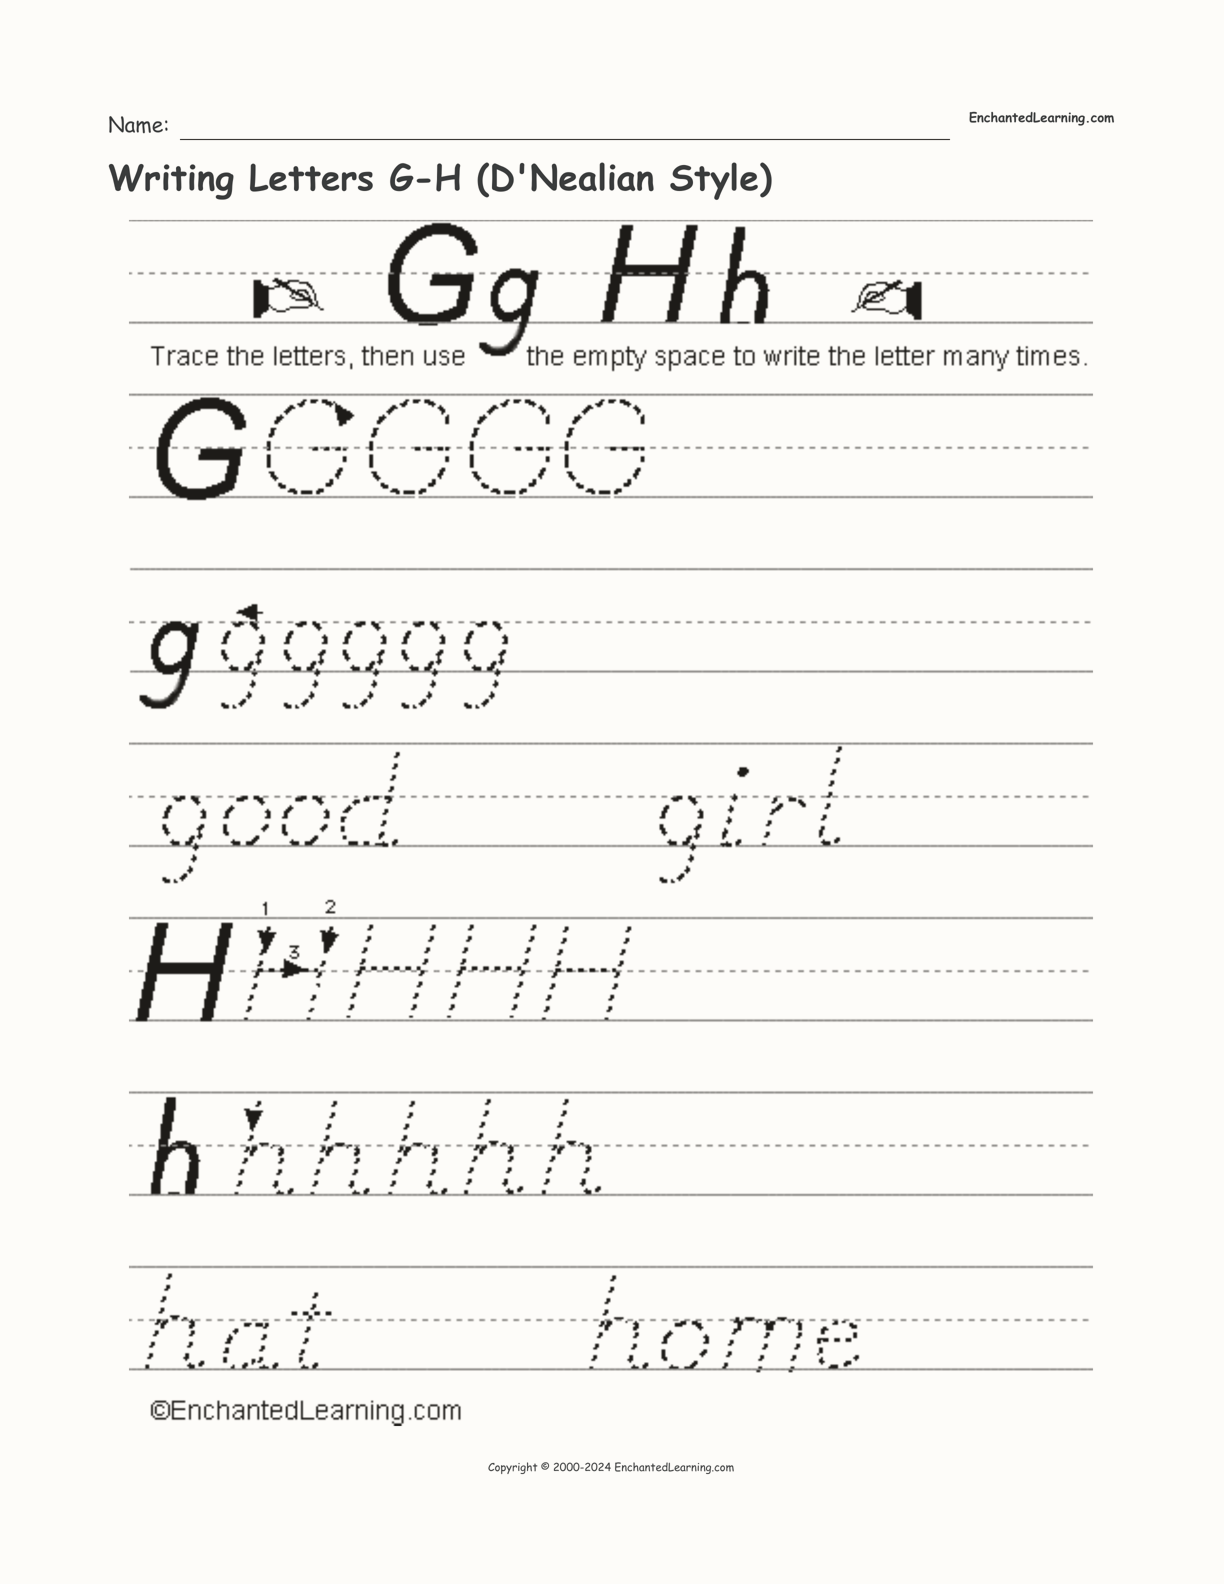 Writing Letters G-H (D'Nealian Style) interactive worksheet page 1